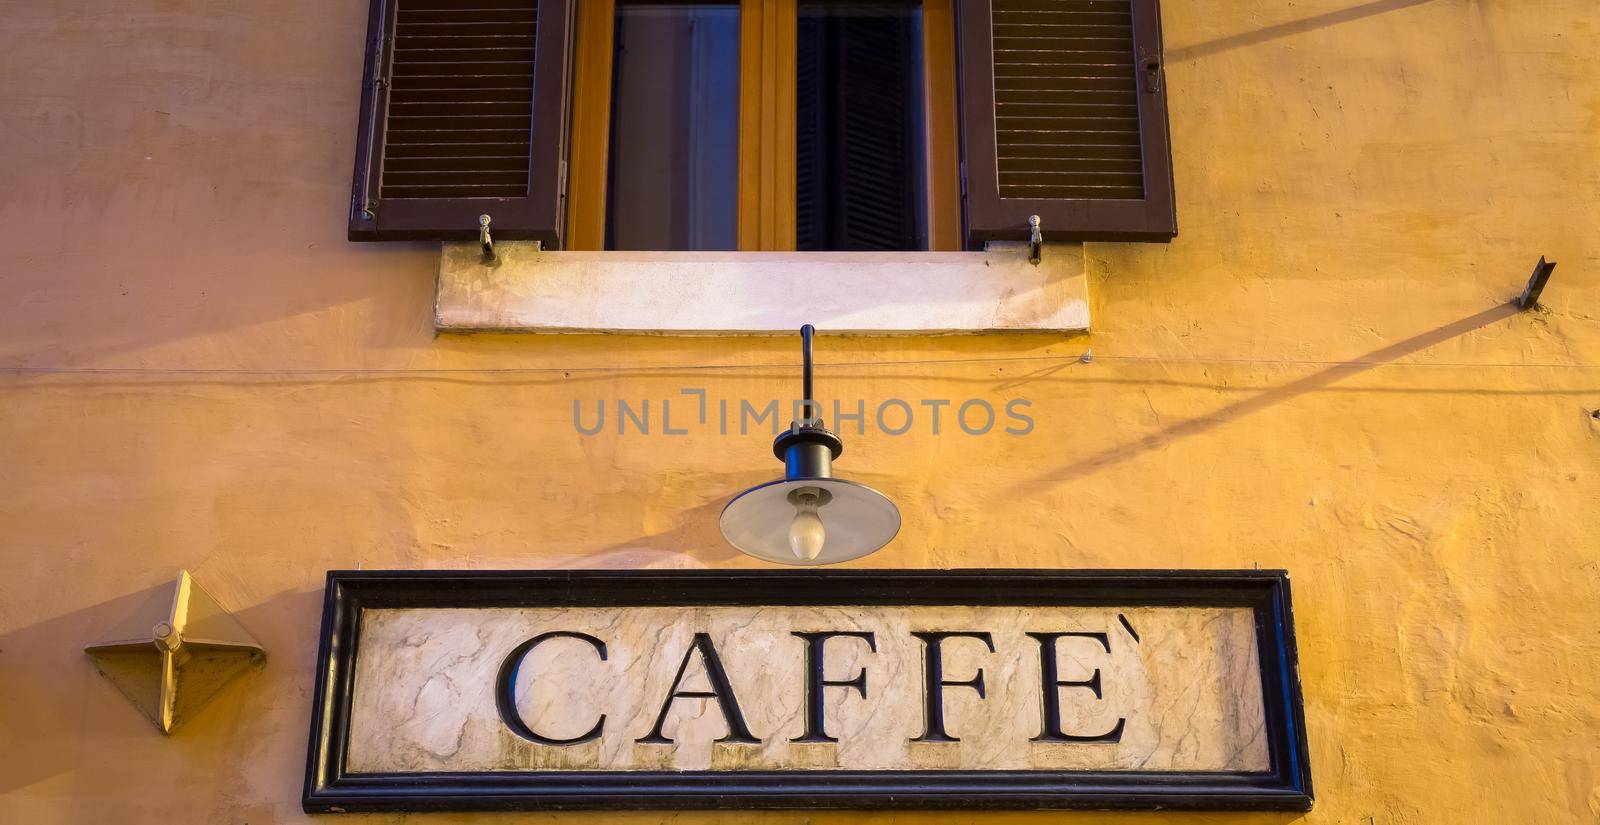 Coffee sign in retro style - Italy by Perseomedusa